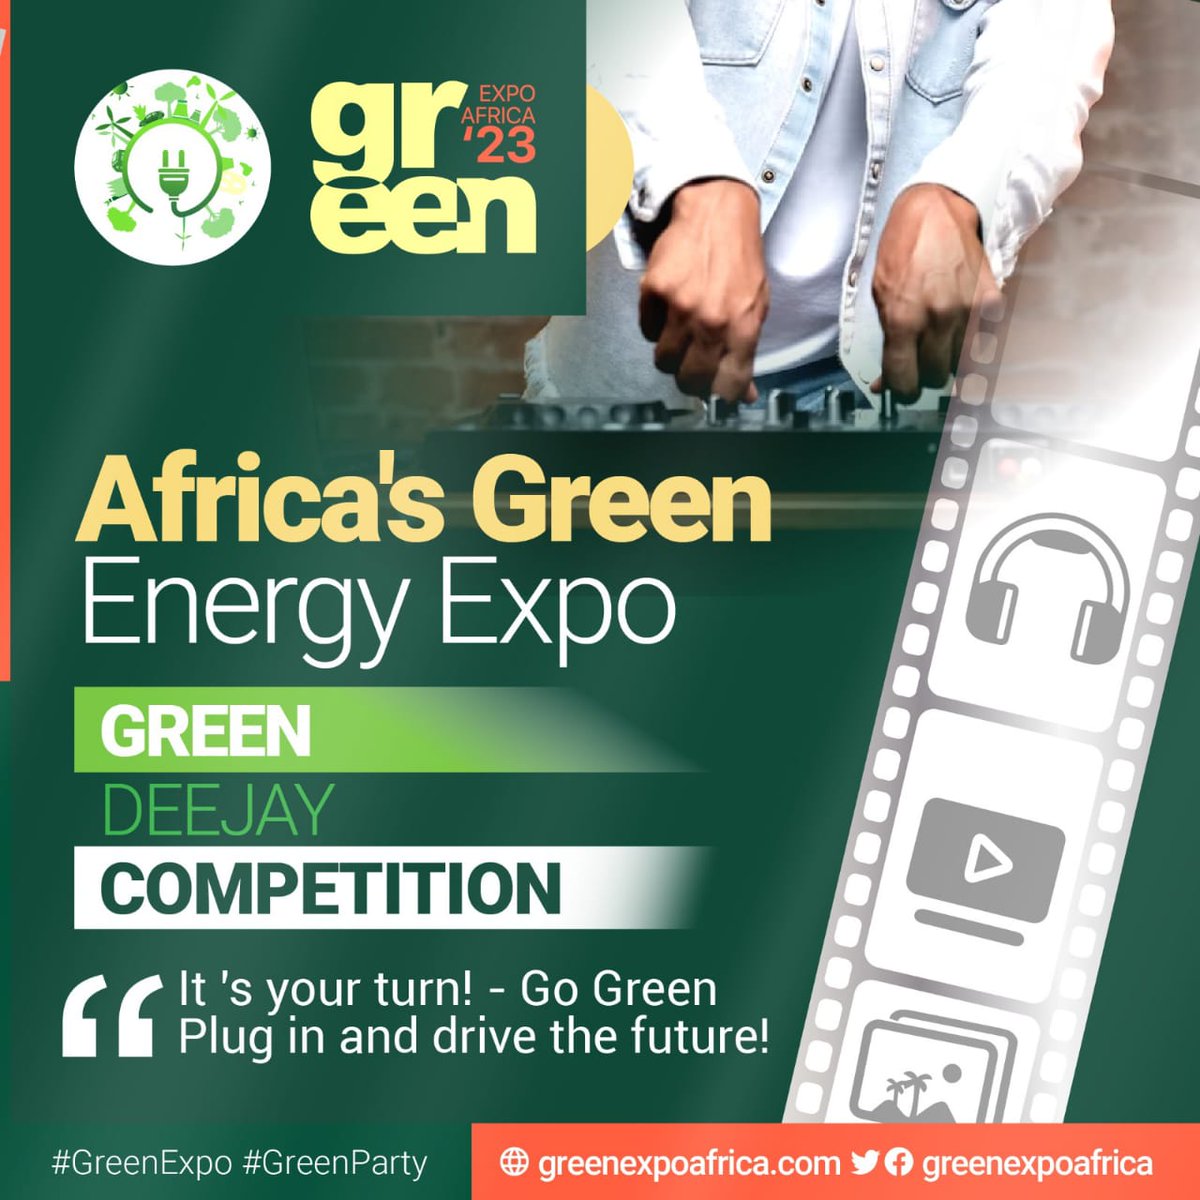 The #GreenExpo will seek to build networks and collaborations with like-minded individuals to drive forward the 
green solutions space, and take action to create a more sustainable planet.

#GoElectric
#SafariNiElectric
#WRCSafari2023